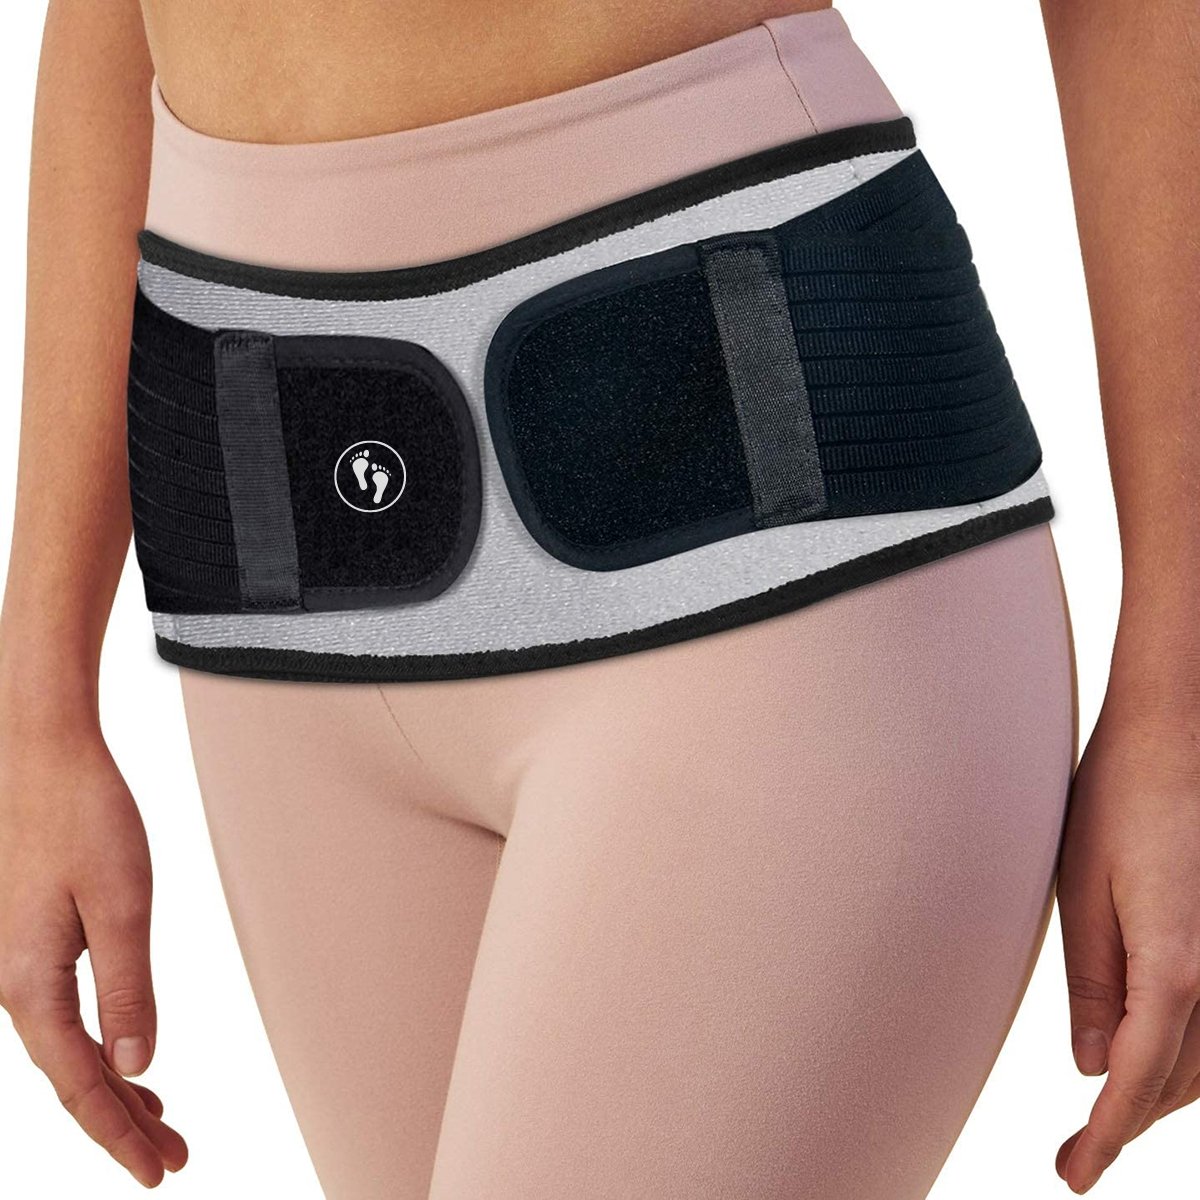 The Ultimate Pain Relief Belt For Sciatica And Low Back Pain